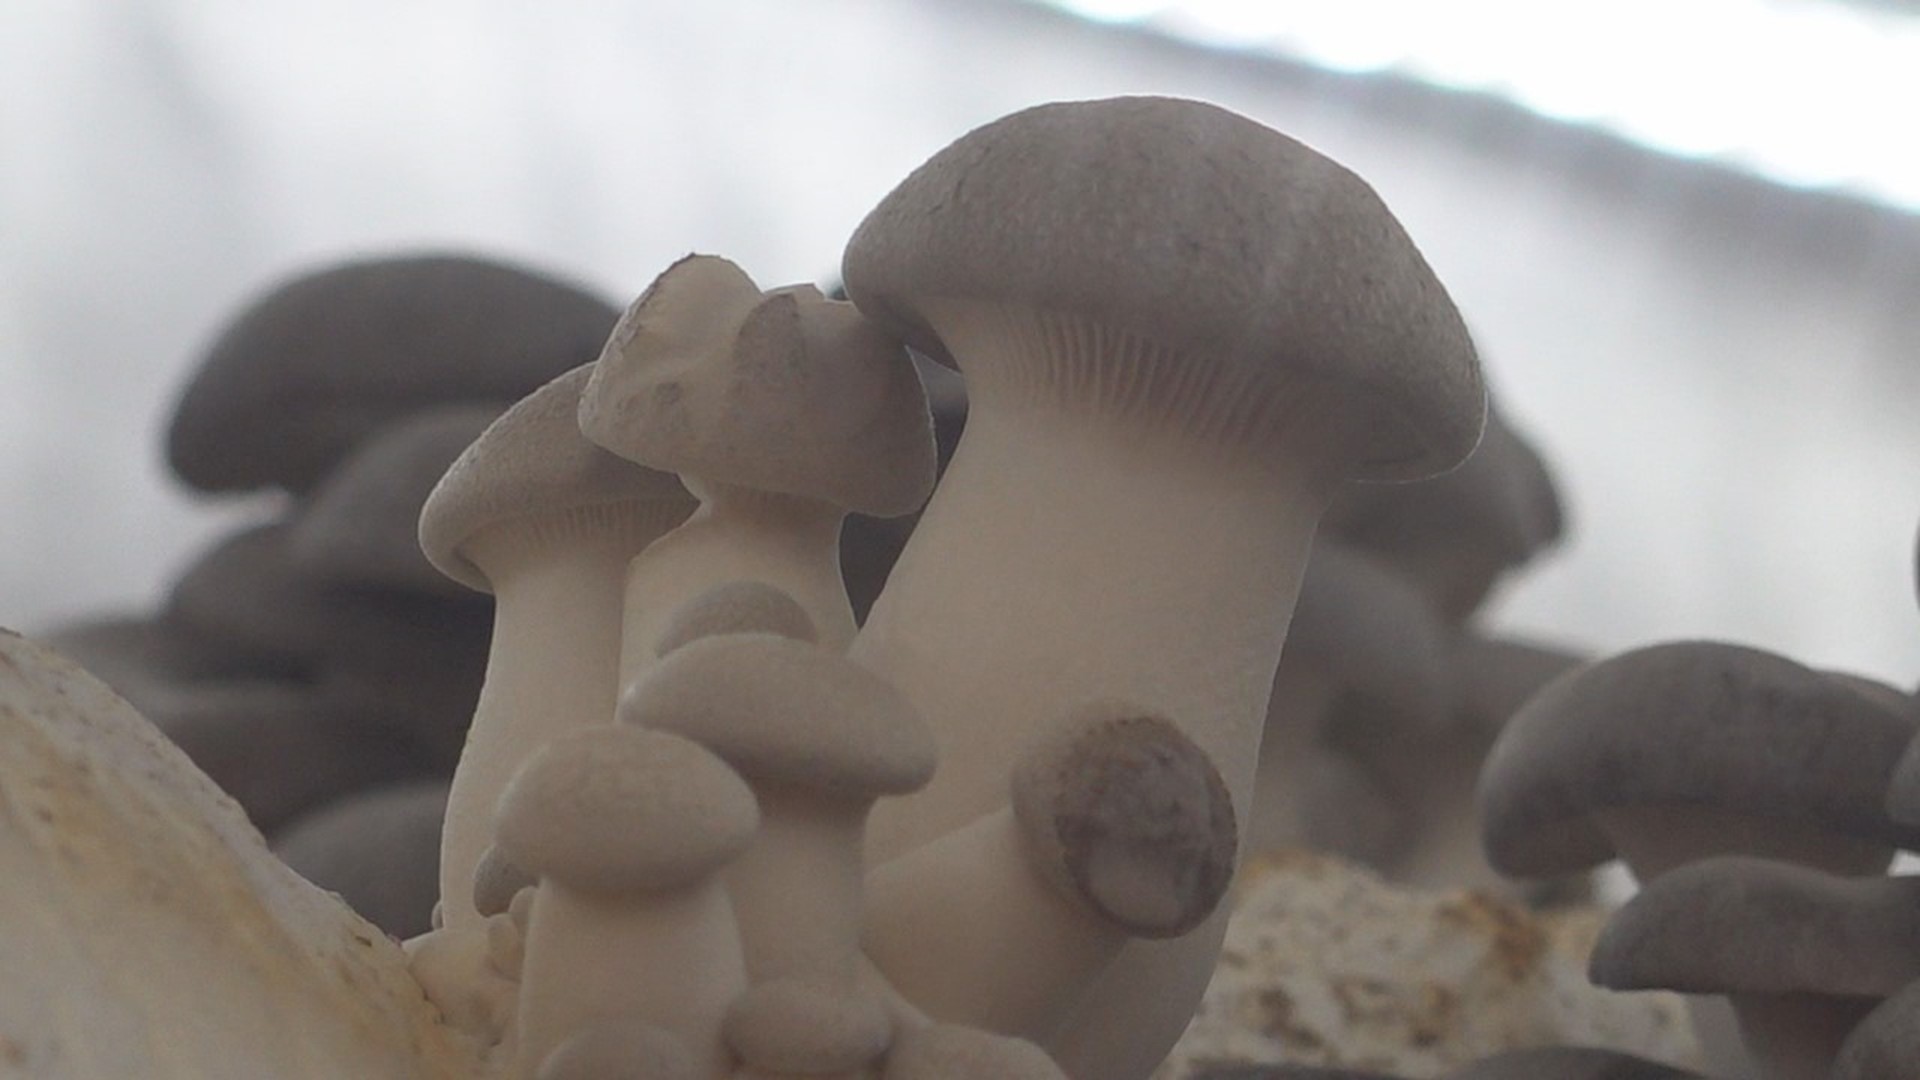 A mushroom farm is springing up in Franklin County, using innovative technologies to grow year-round. The new growth sprouted out of a near catastrophe.